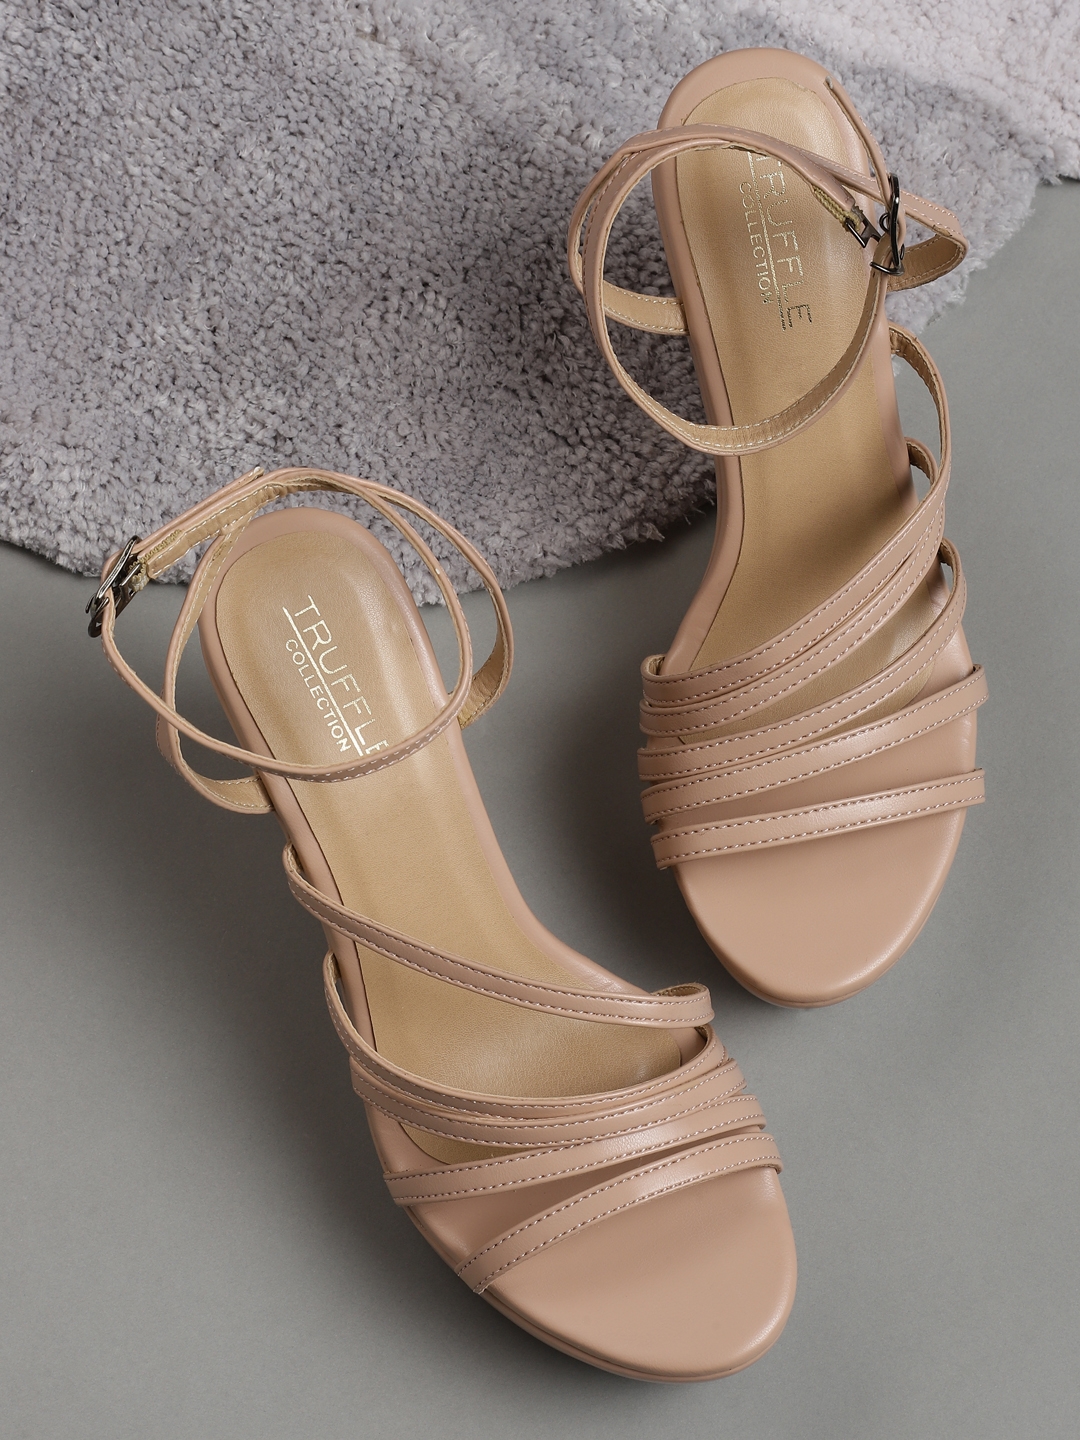 Truffle Collection | Nude PU Wedges Sandal